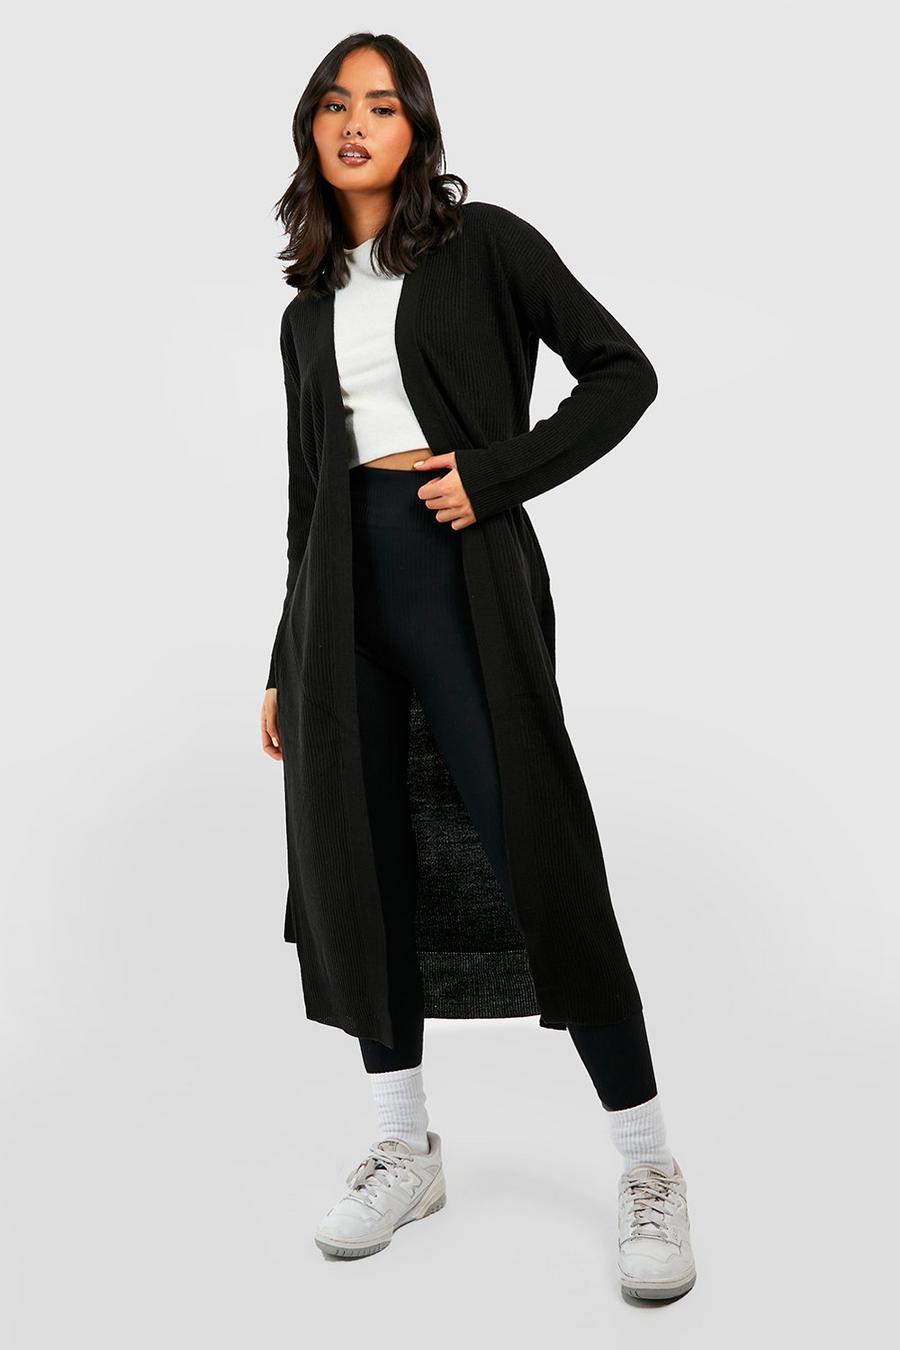 YOURS Plus Size Black Knitted Maxi Cardigan